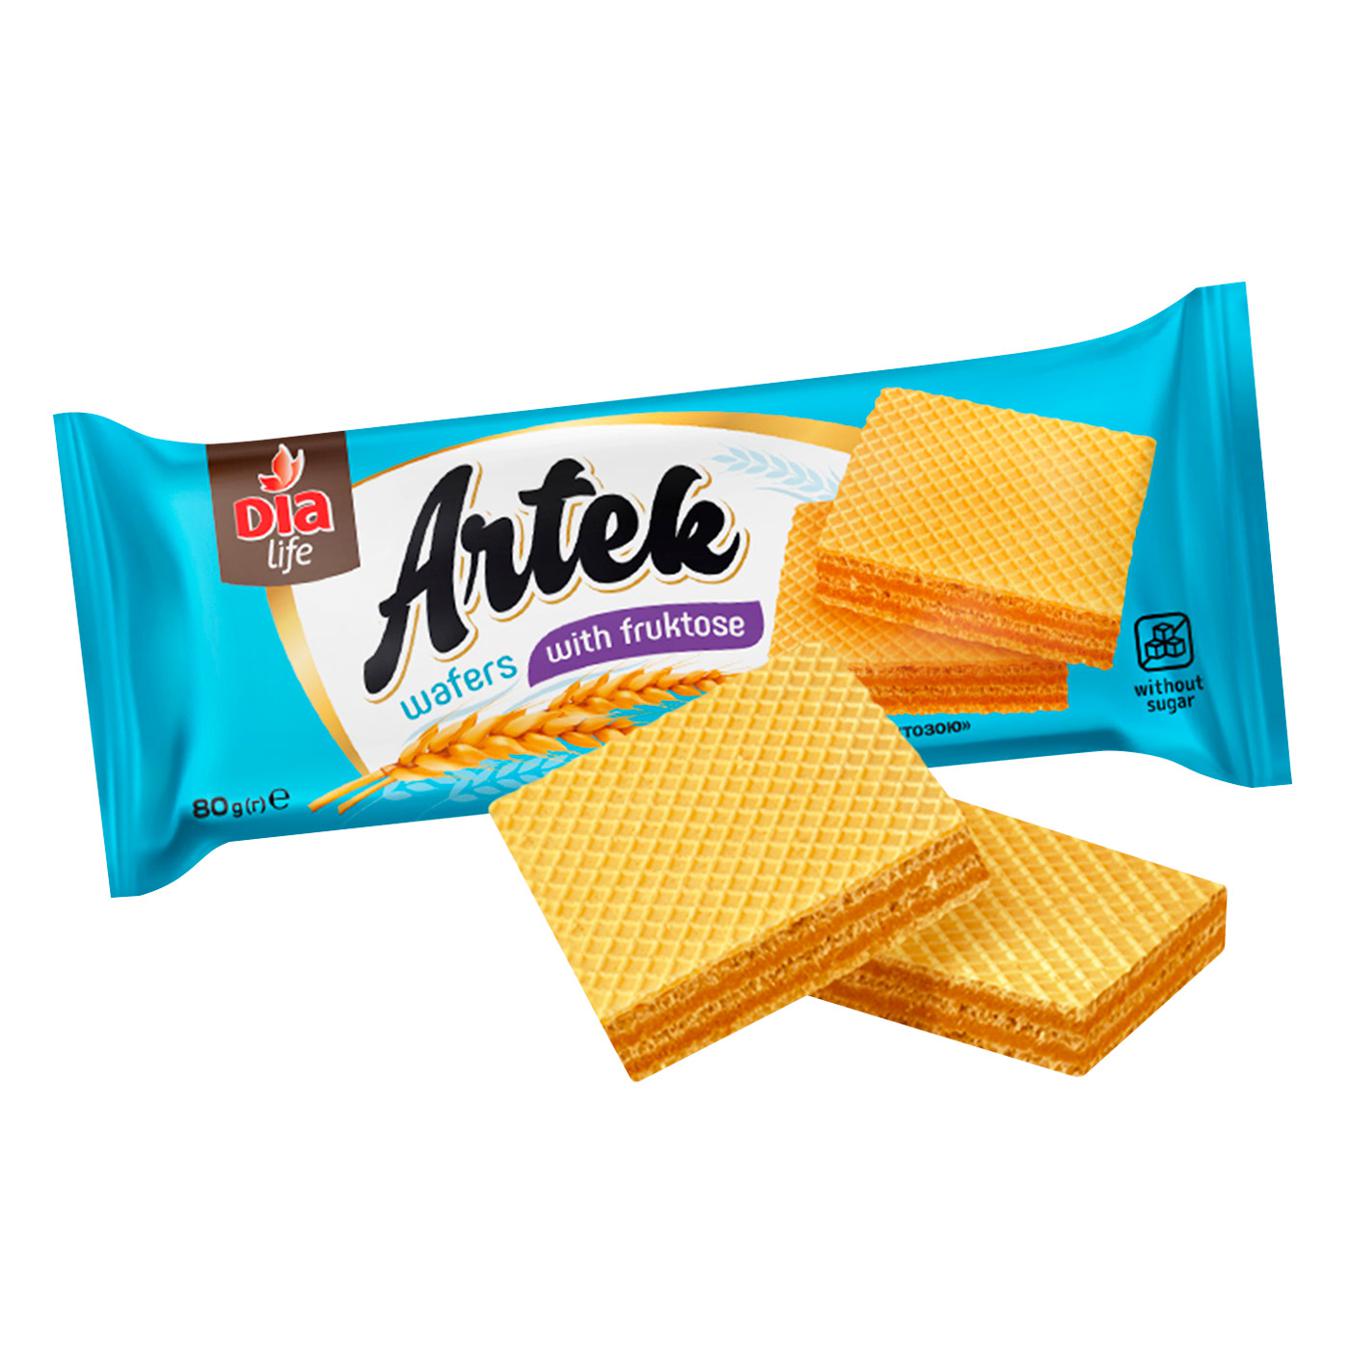 Wafers DiaLife Artek with fructose 80g